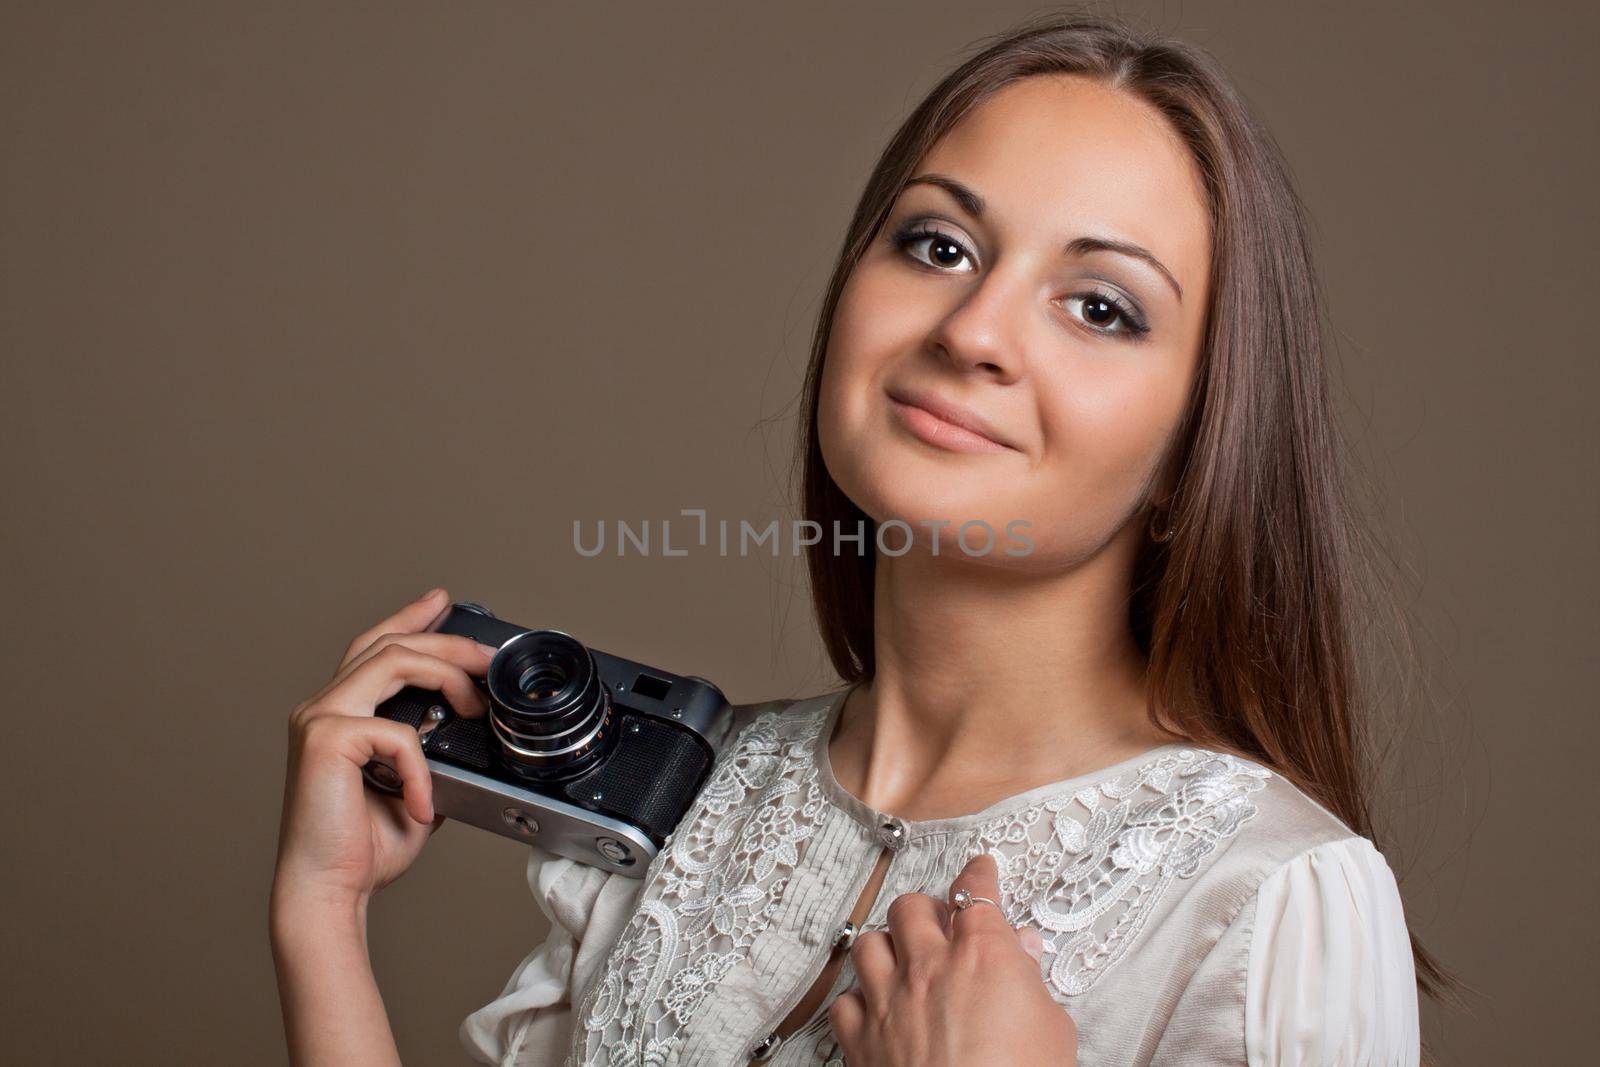 Young brown haired woman in beautiful dress holding retro camera in hands on neutral warm background